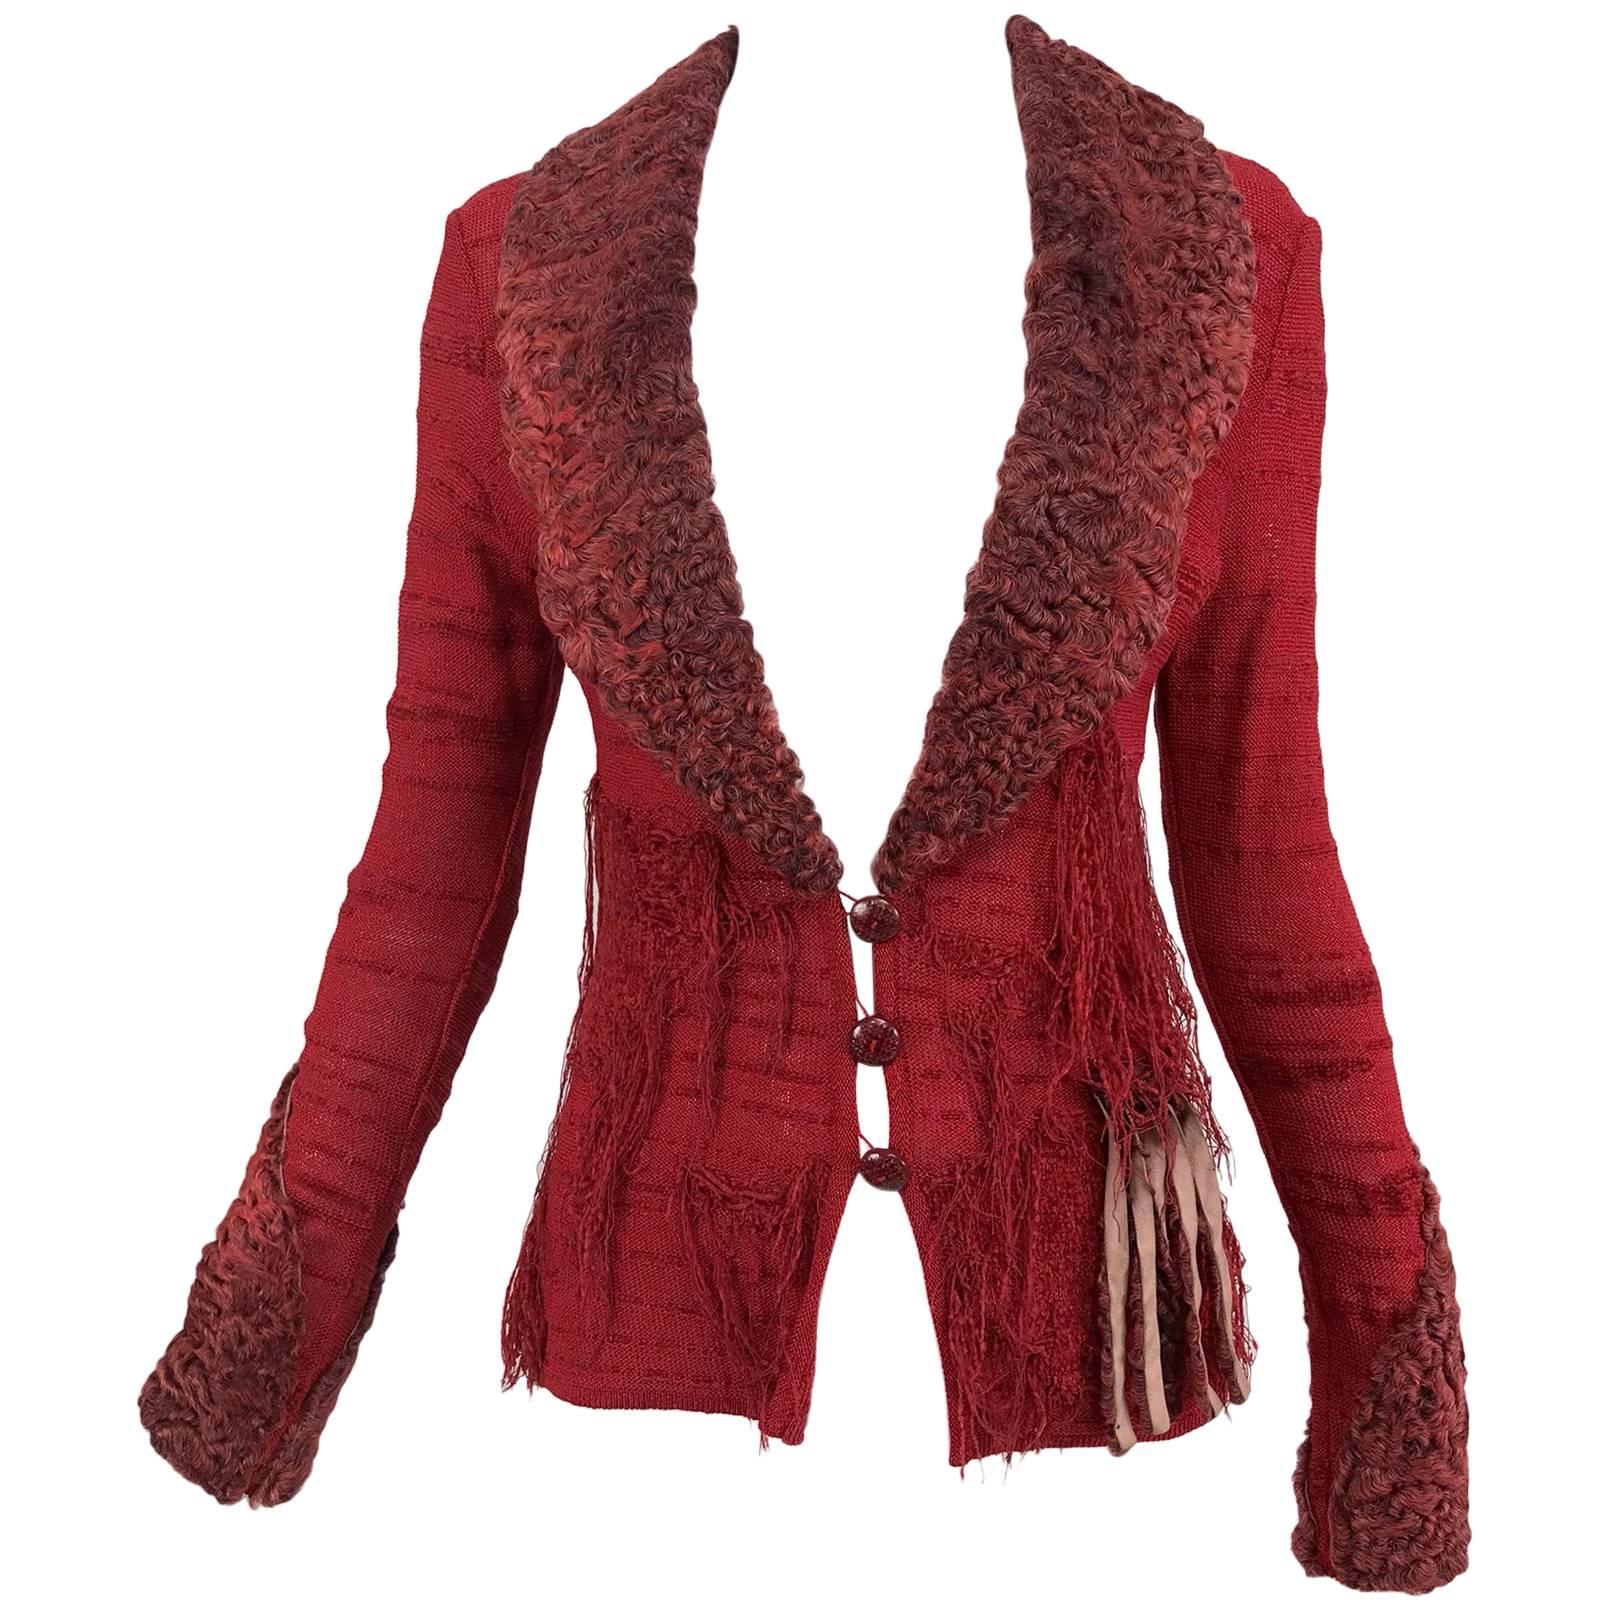 Christian LaCroix Brick Red Cardigan Sweater with Dyed Lamb Fur Trim 